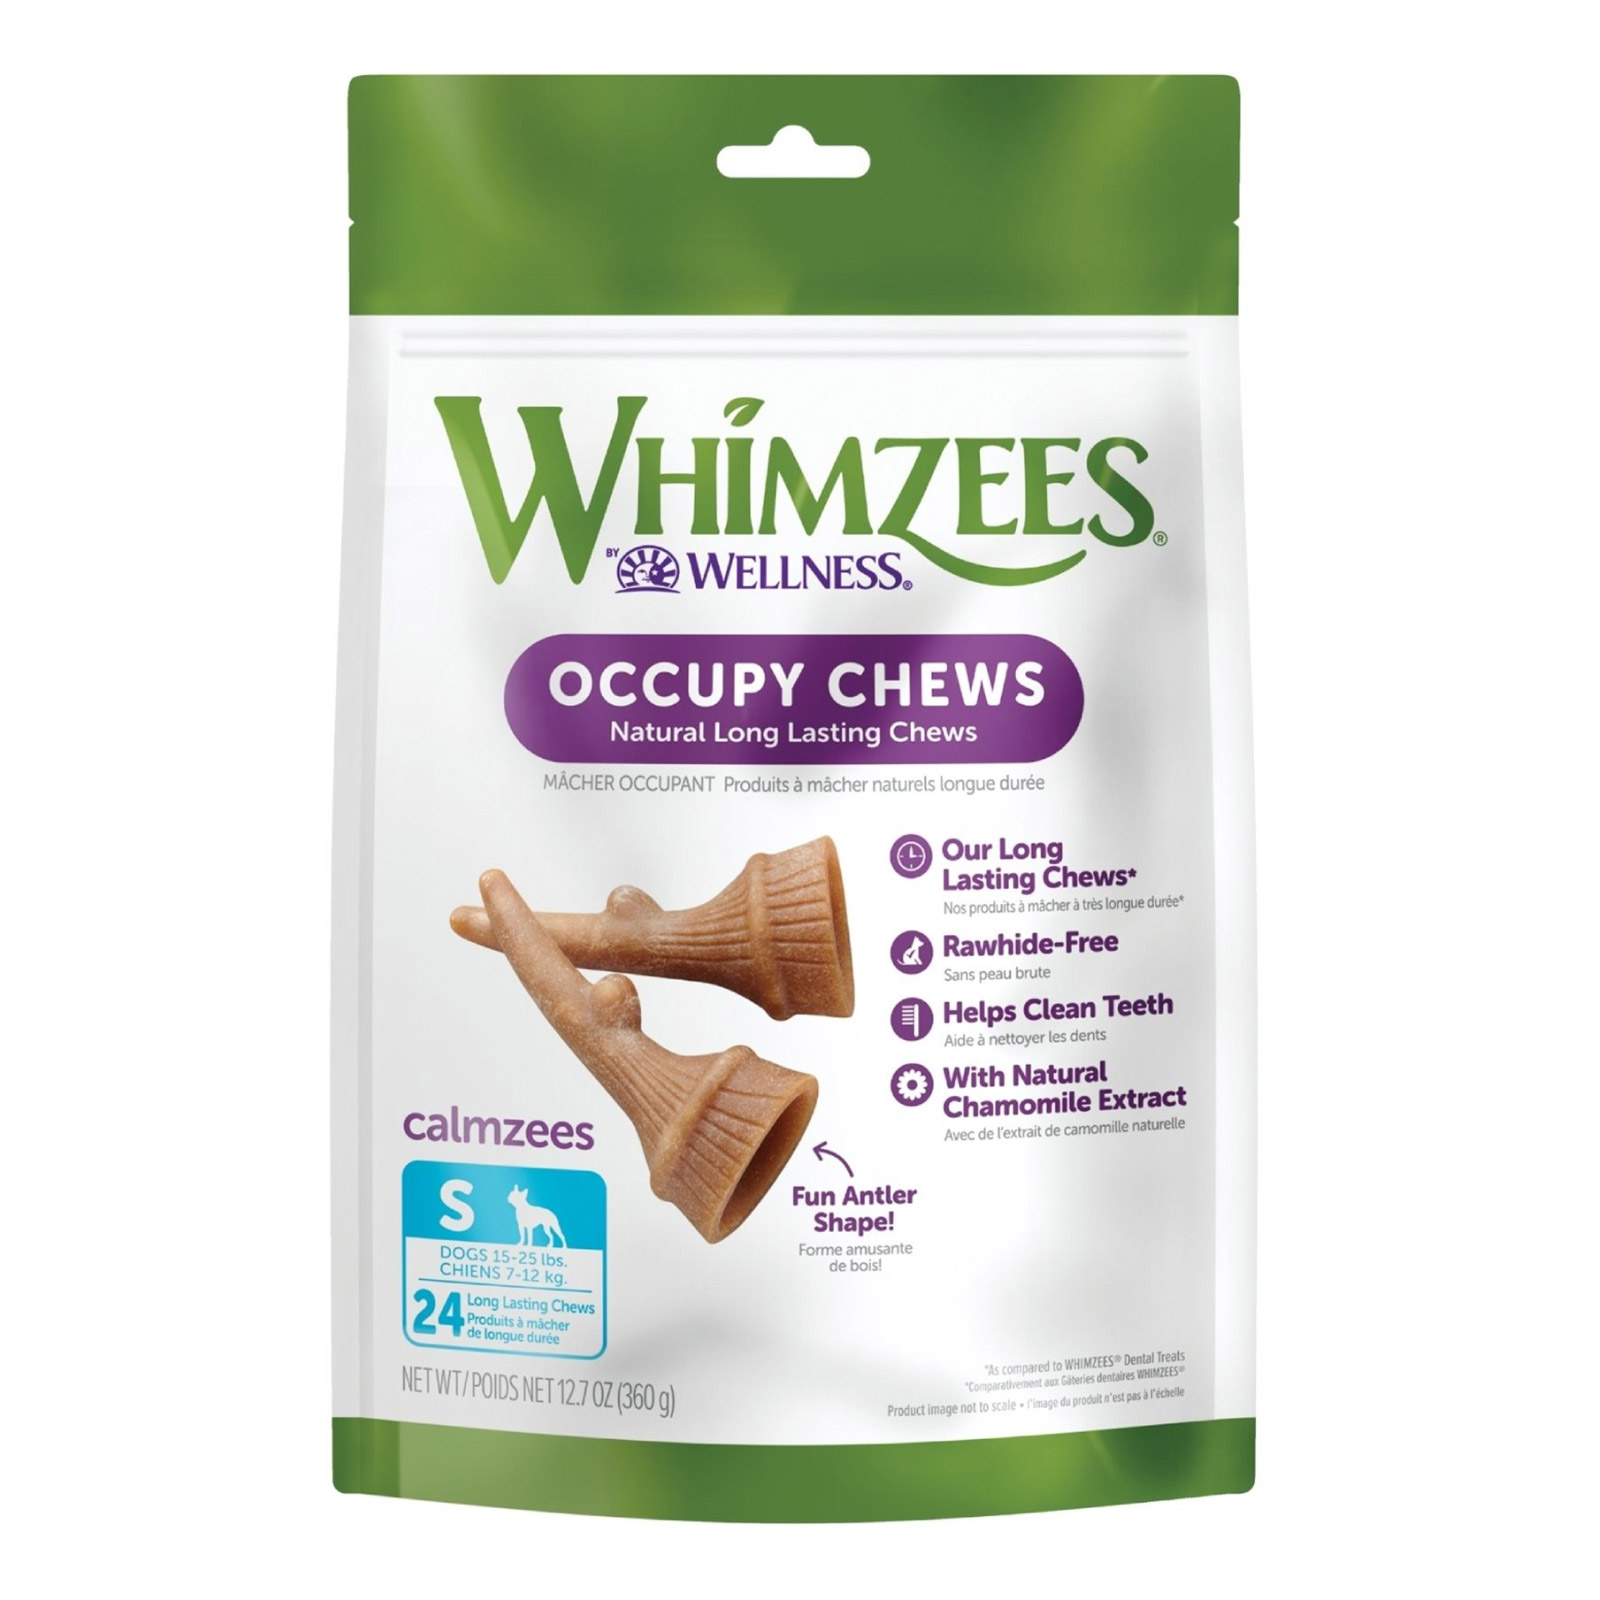 Whimzees Occupy Calmzees Antler Value Bag Dog Dental Treats for Dogs